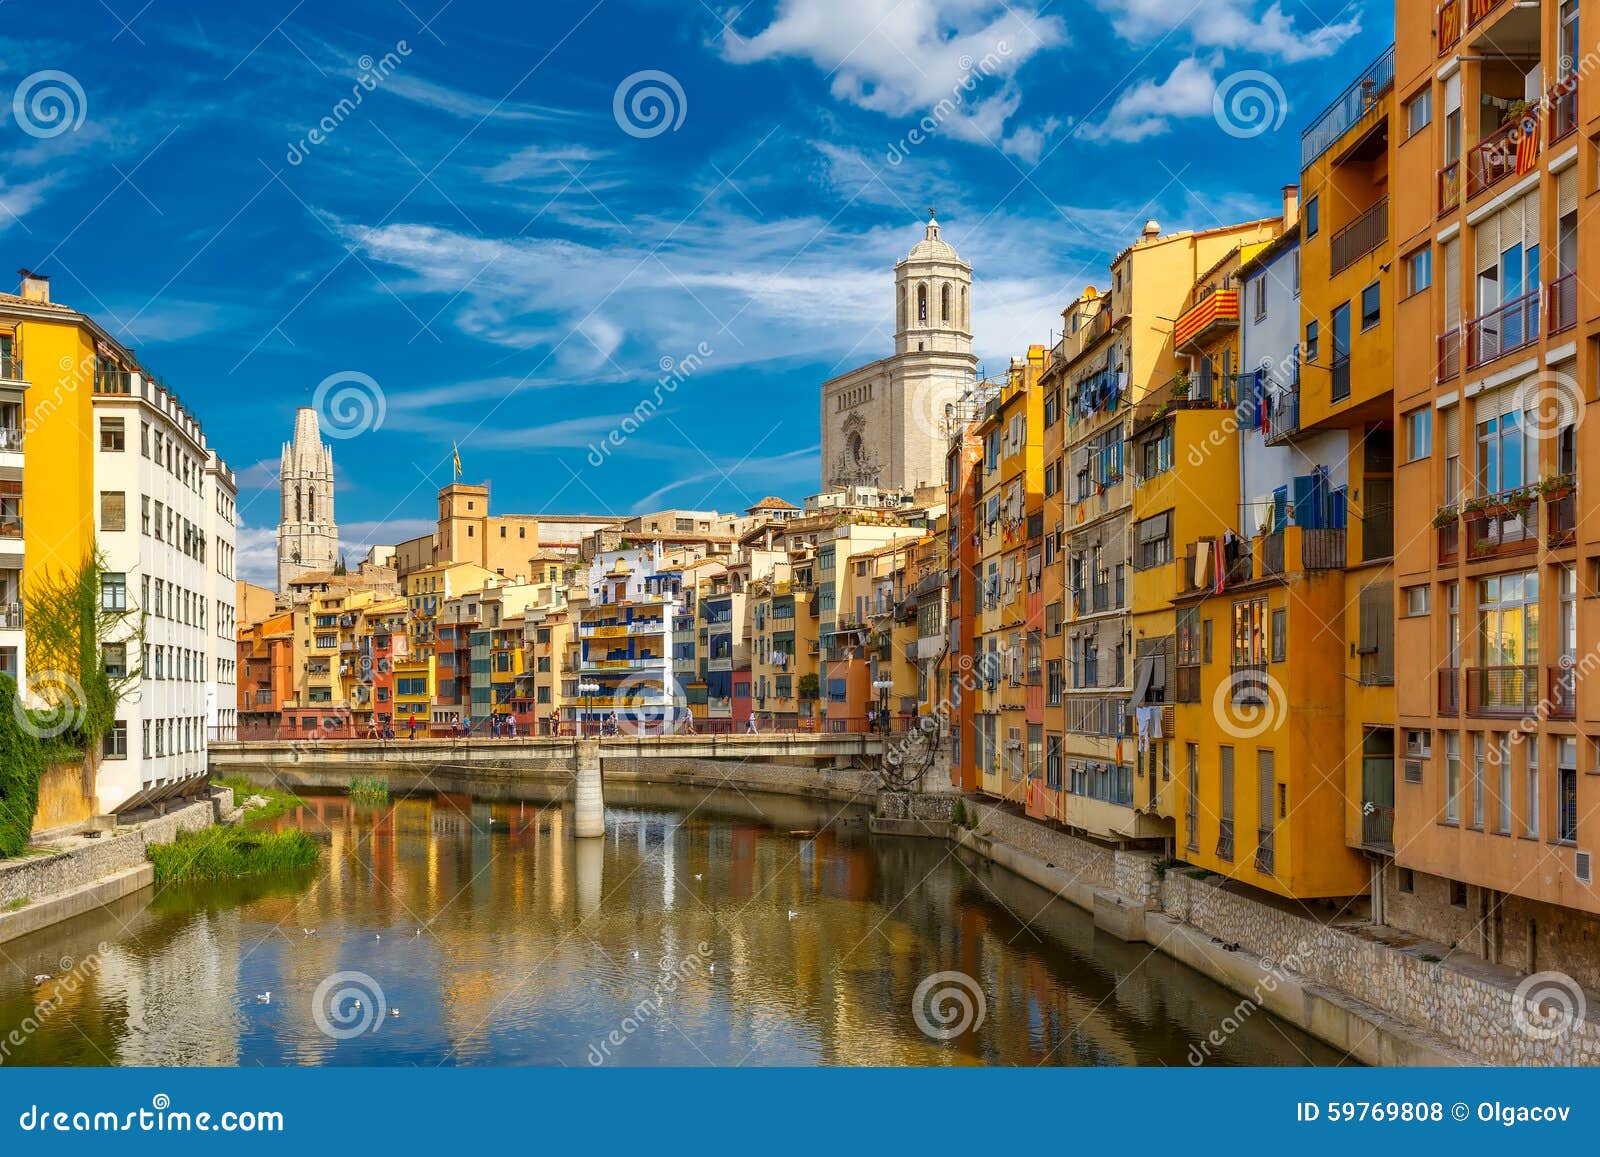 colorful houses in girona, catalonia, spain